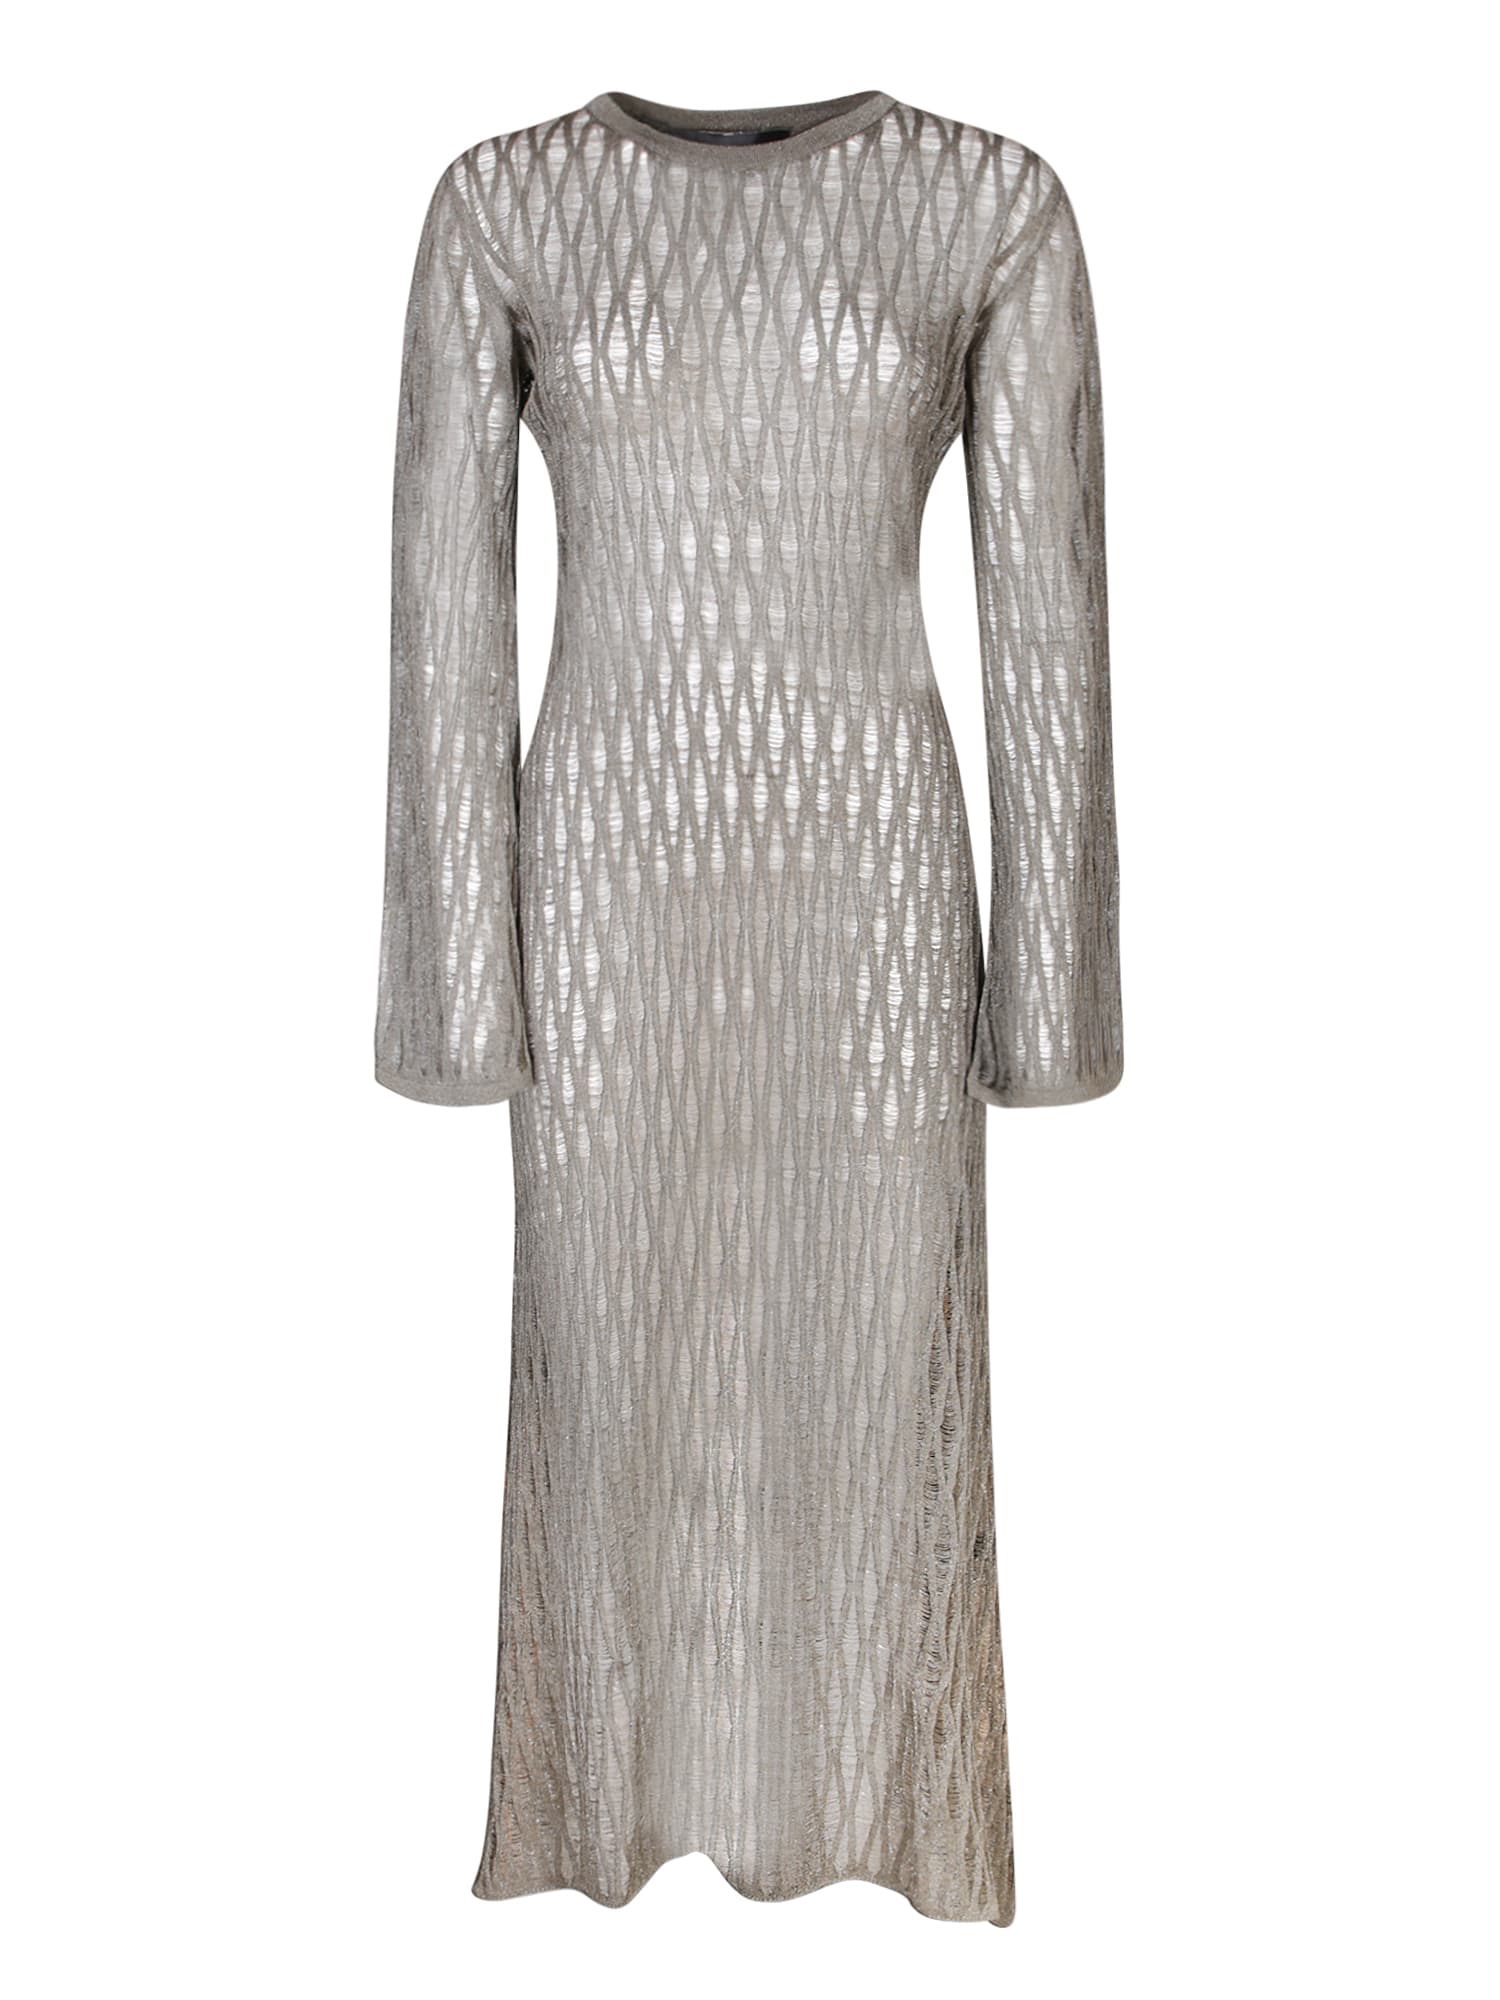 Silver Long Perforated Knit Dress